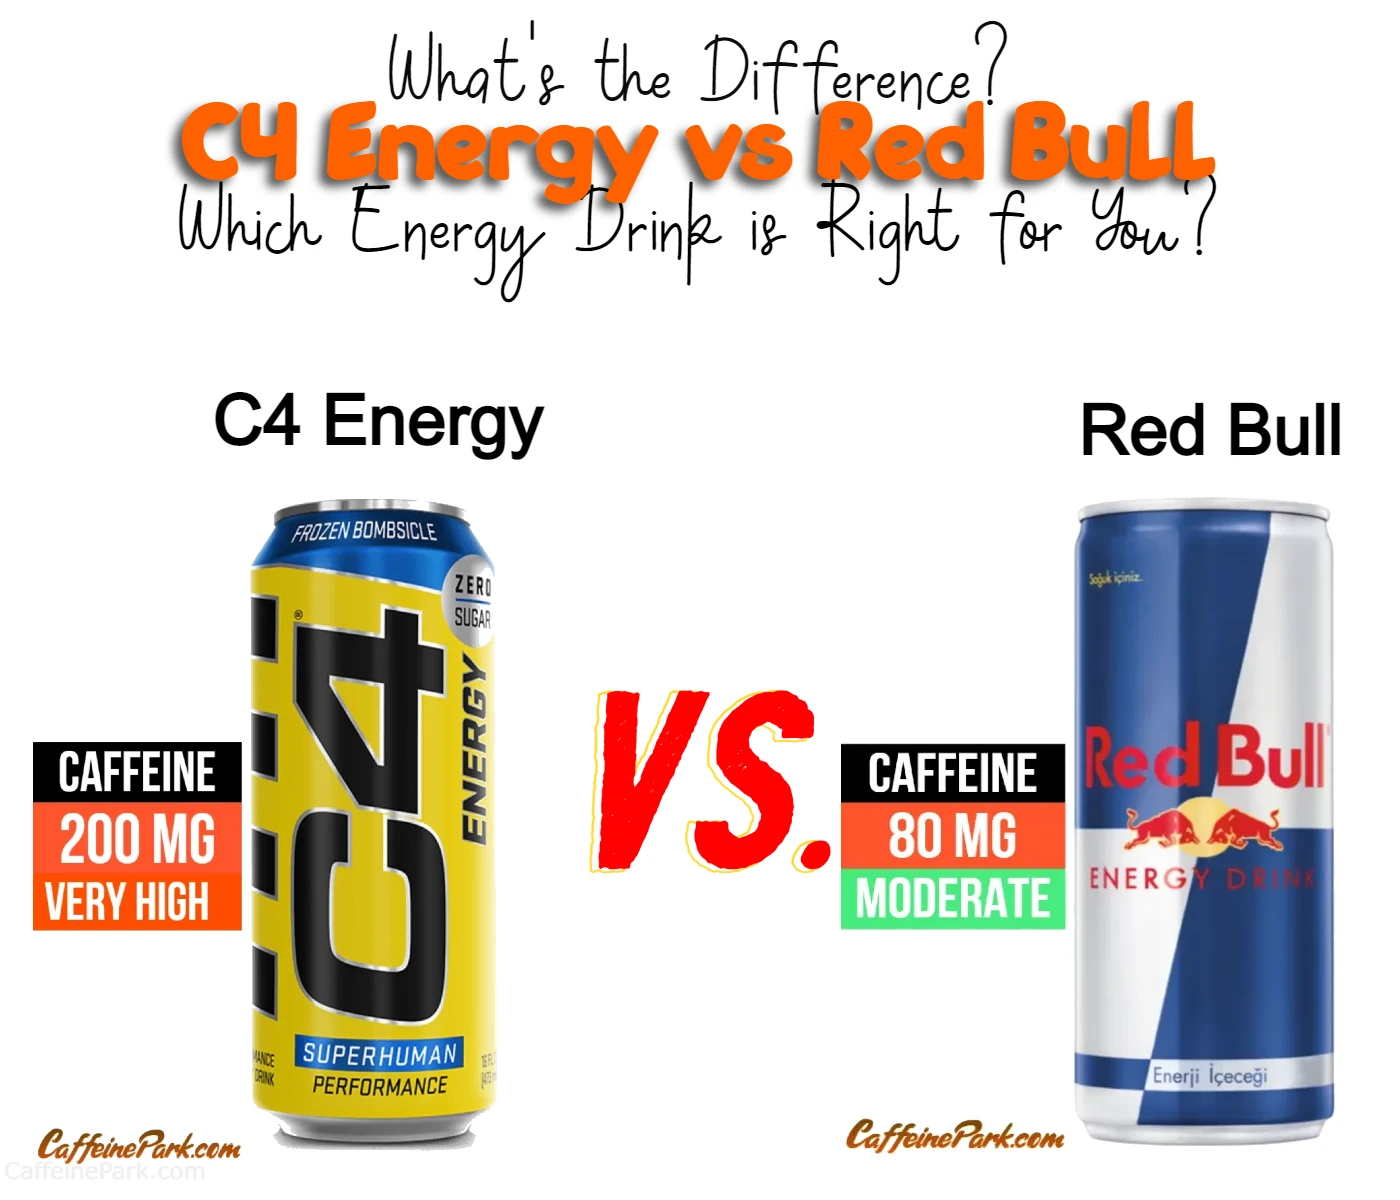 C4 Drink vs. Red Bull: What's the